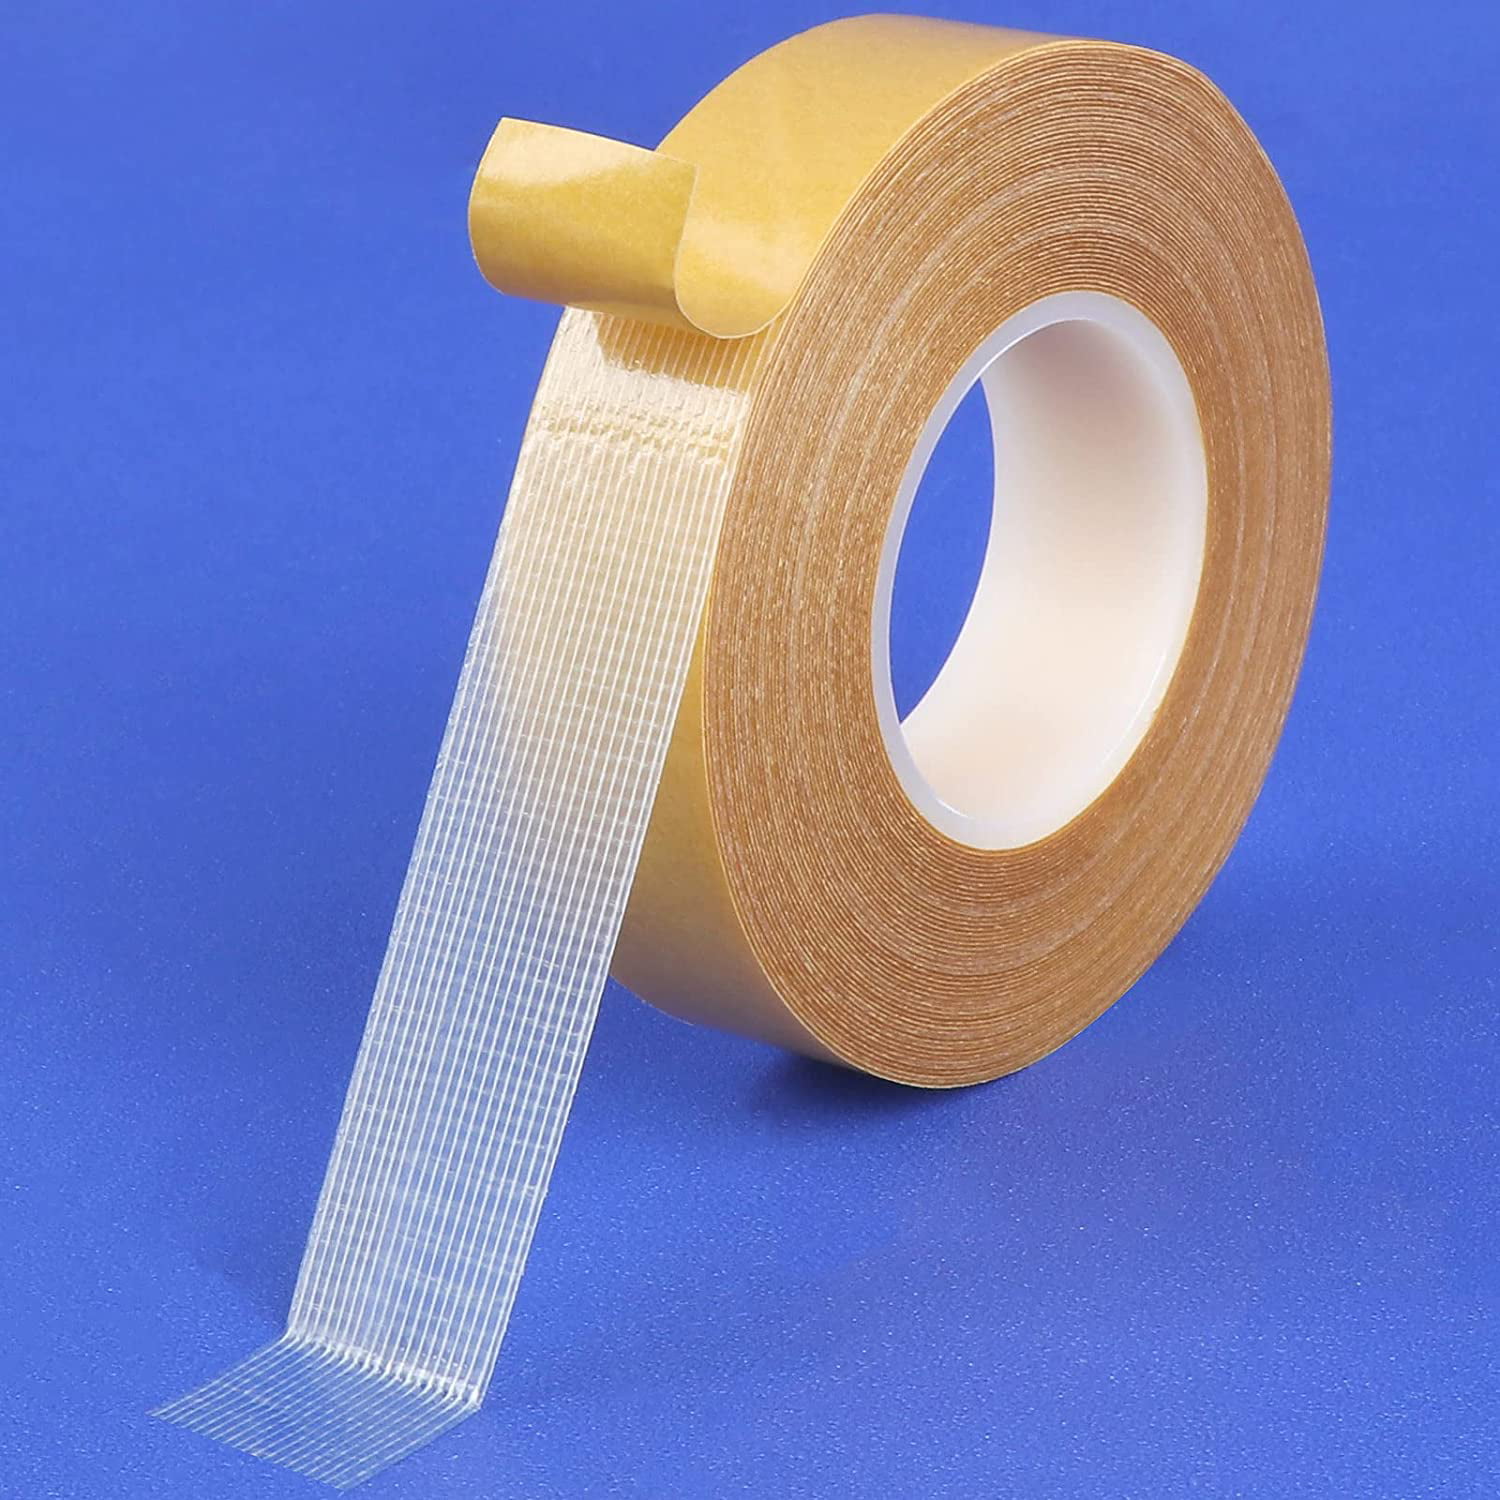 Double Sided Clear Mounting Tape 1.2 Wide, 9.8' Long Acrylic Gel Tape for  Temps 0-100, Heavy Duty Multipurpose by KapStrom 